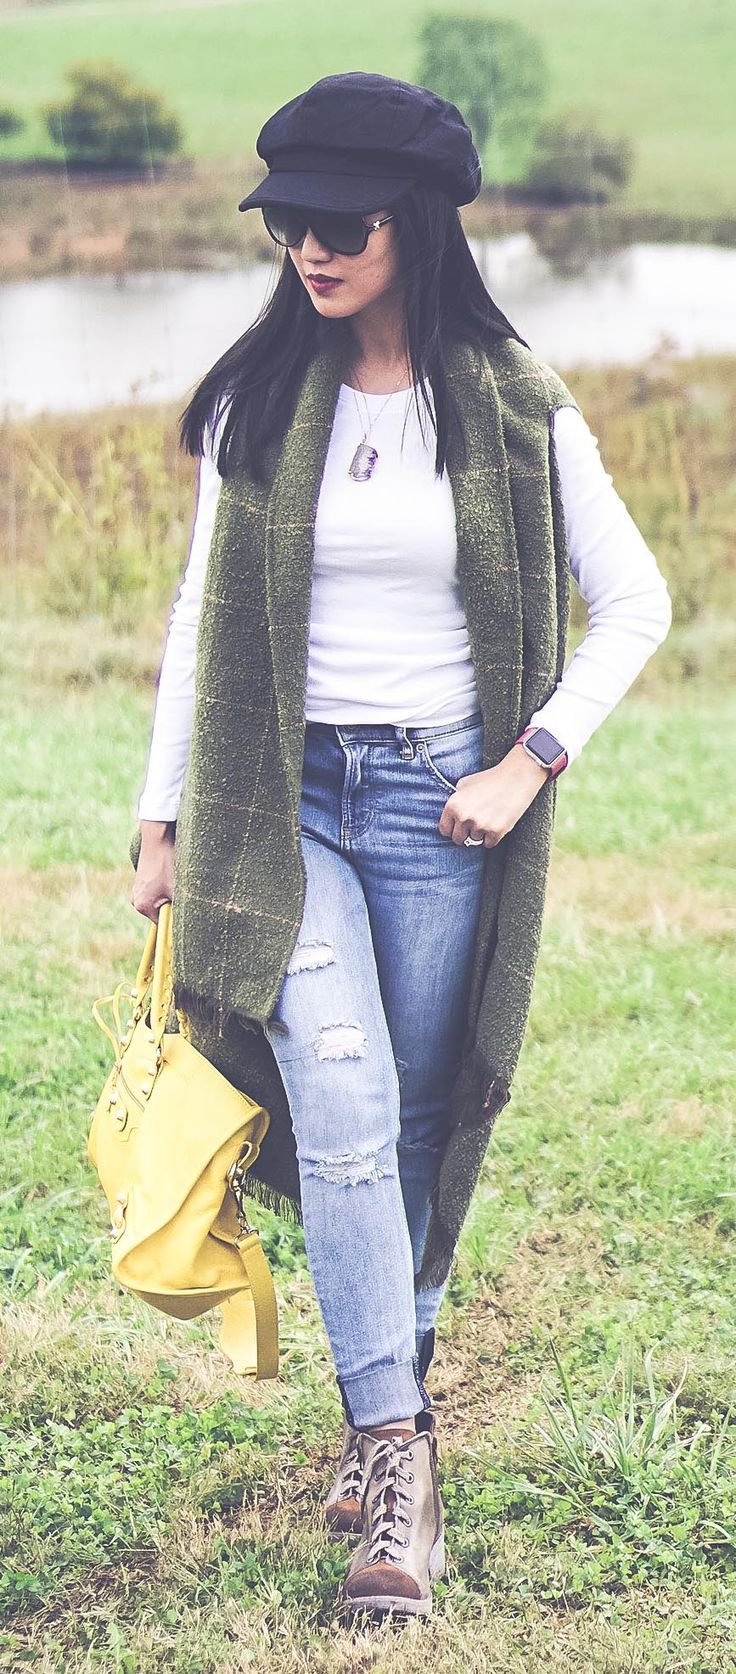 What I Wore On An Apple Picking Trip: Sleeveless Vest + Distressed Jeans